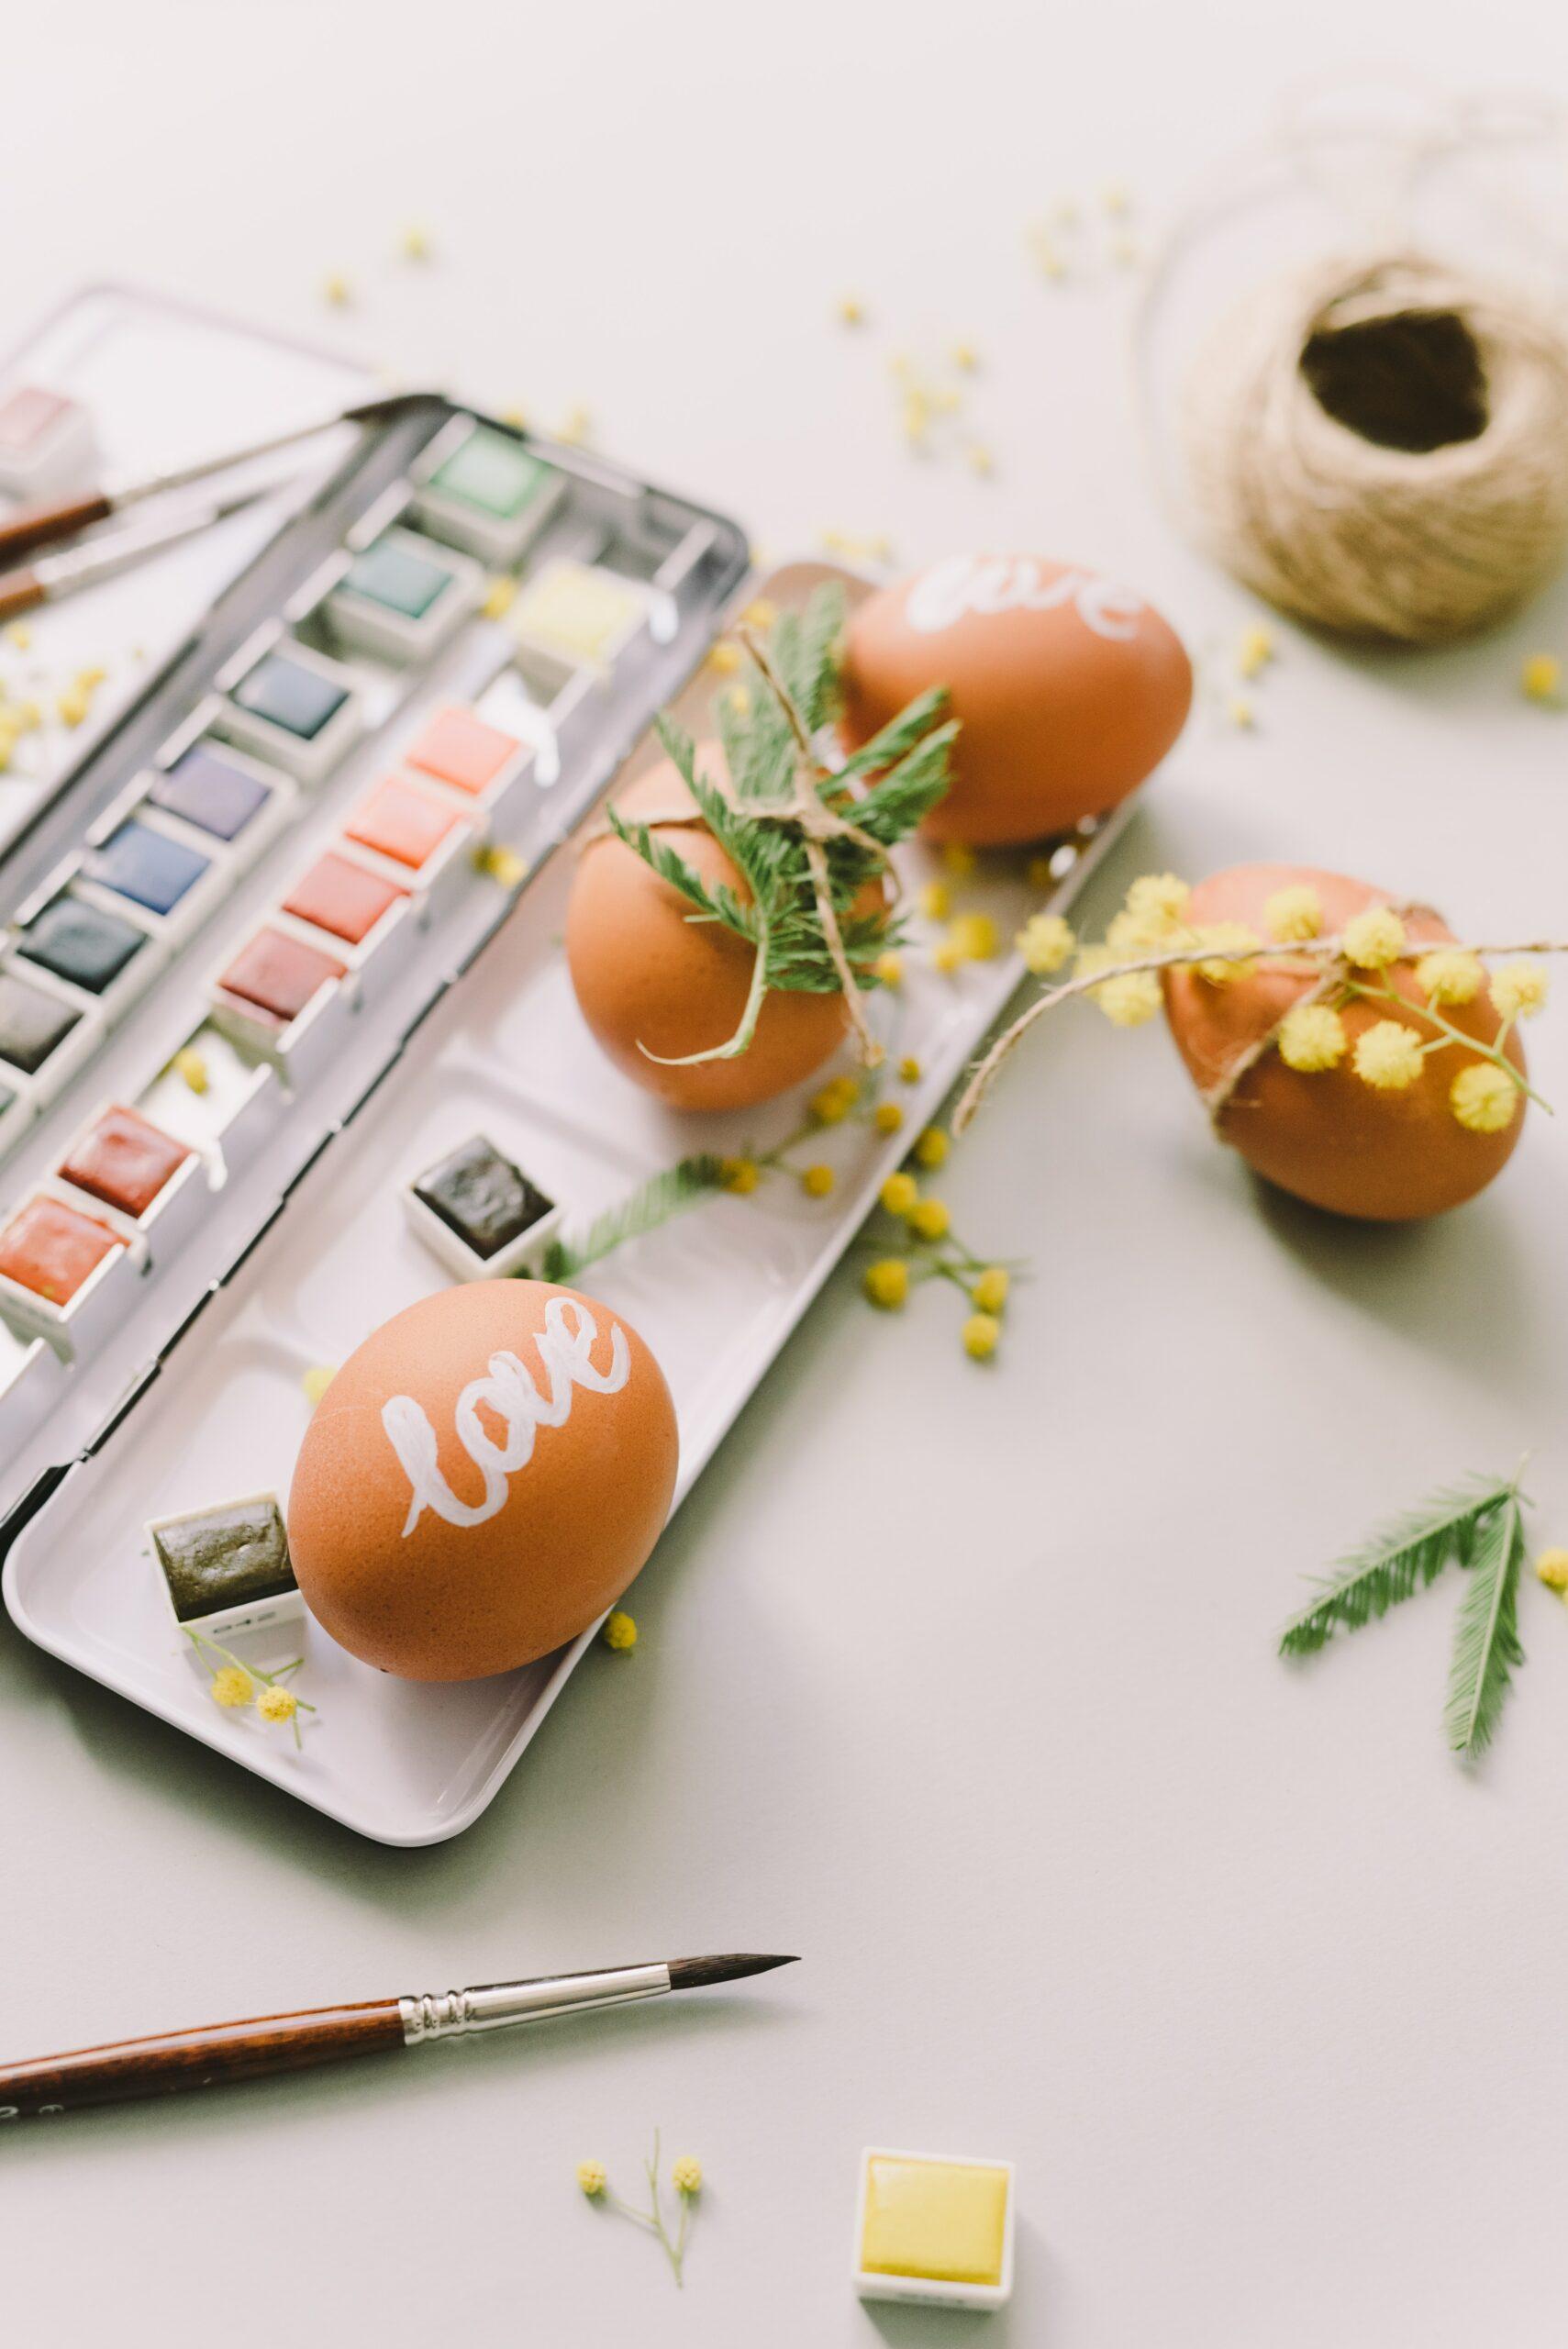 Brown eggs painted with the word "love" in white paint. The eggs are sitting on a paint pallet with some flowers and greenery.